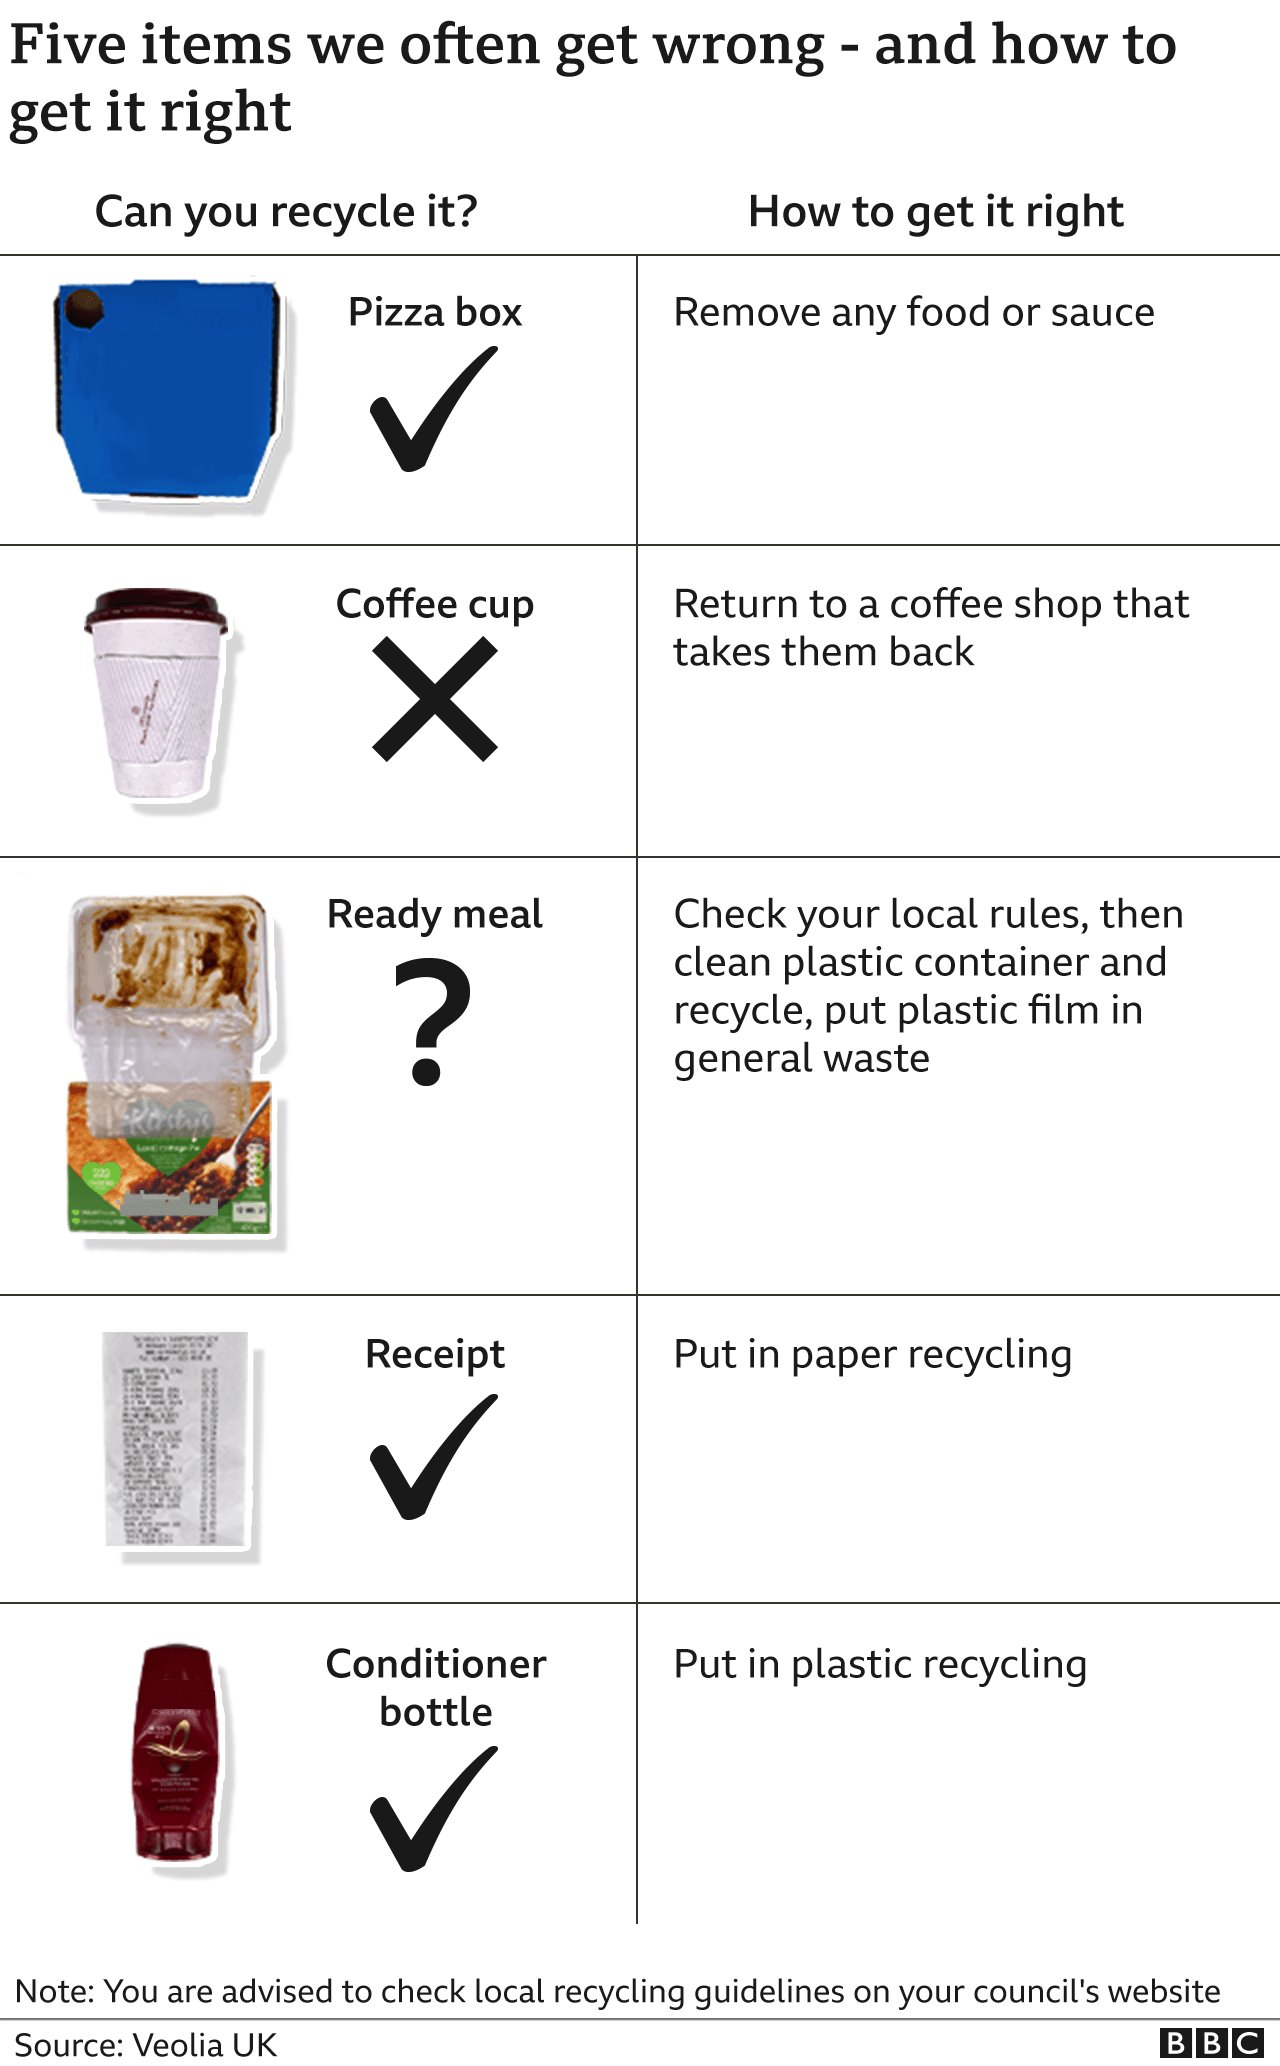 Graphic showing five recycling items people often get wrong and then giving tips about how to get it right. The items and tips are: Pizza box - Remove any food or sauce. Coffee cups - Return to a coffee shop that takes them back. Ready meal - Check your local rules, then clean plastic container and recycle, put plastic film in general waste. Receipt: Put in paper recycling. Conditioner bottle: Put in plastic recycling